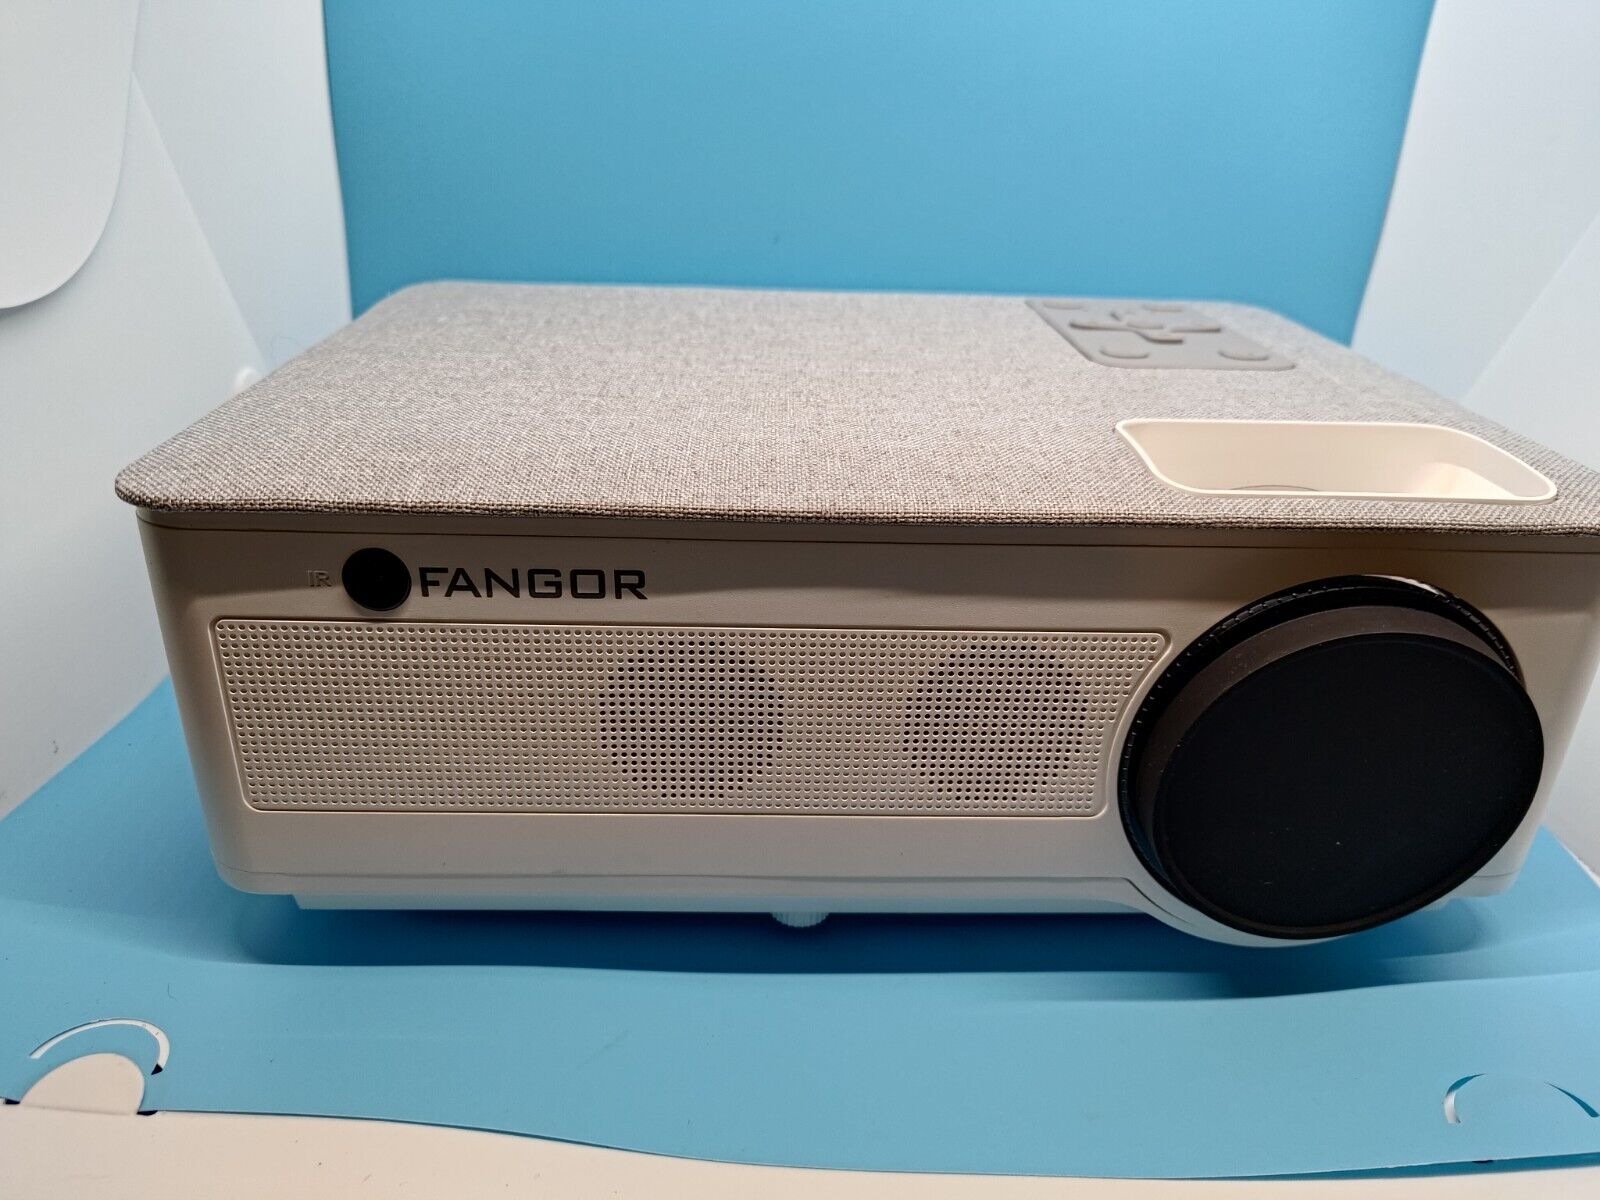 How To Connect IPhone To Fangor Projector